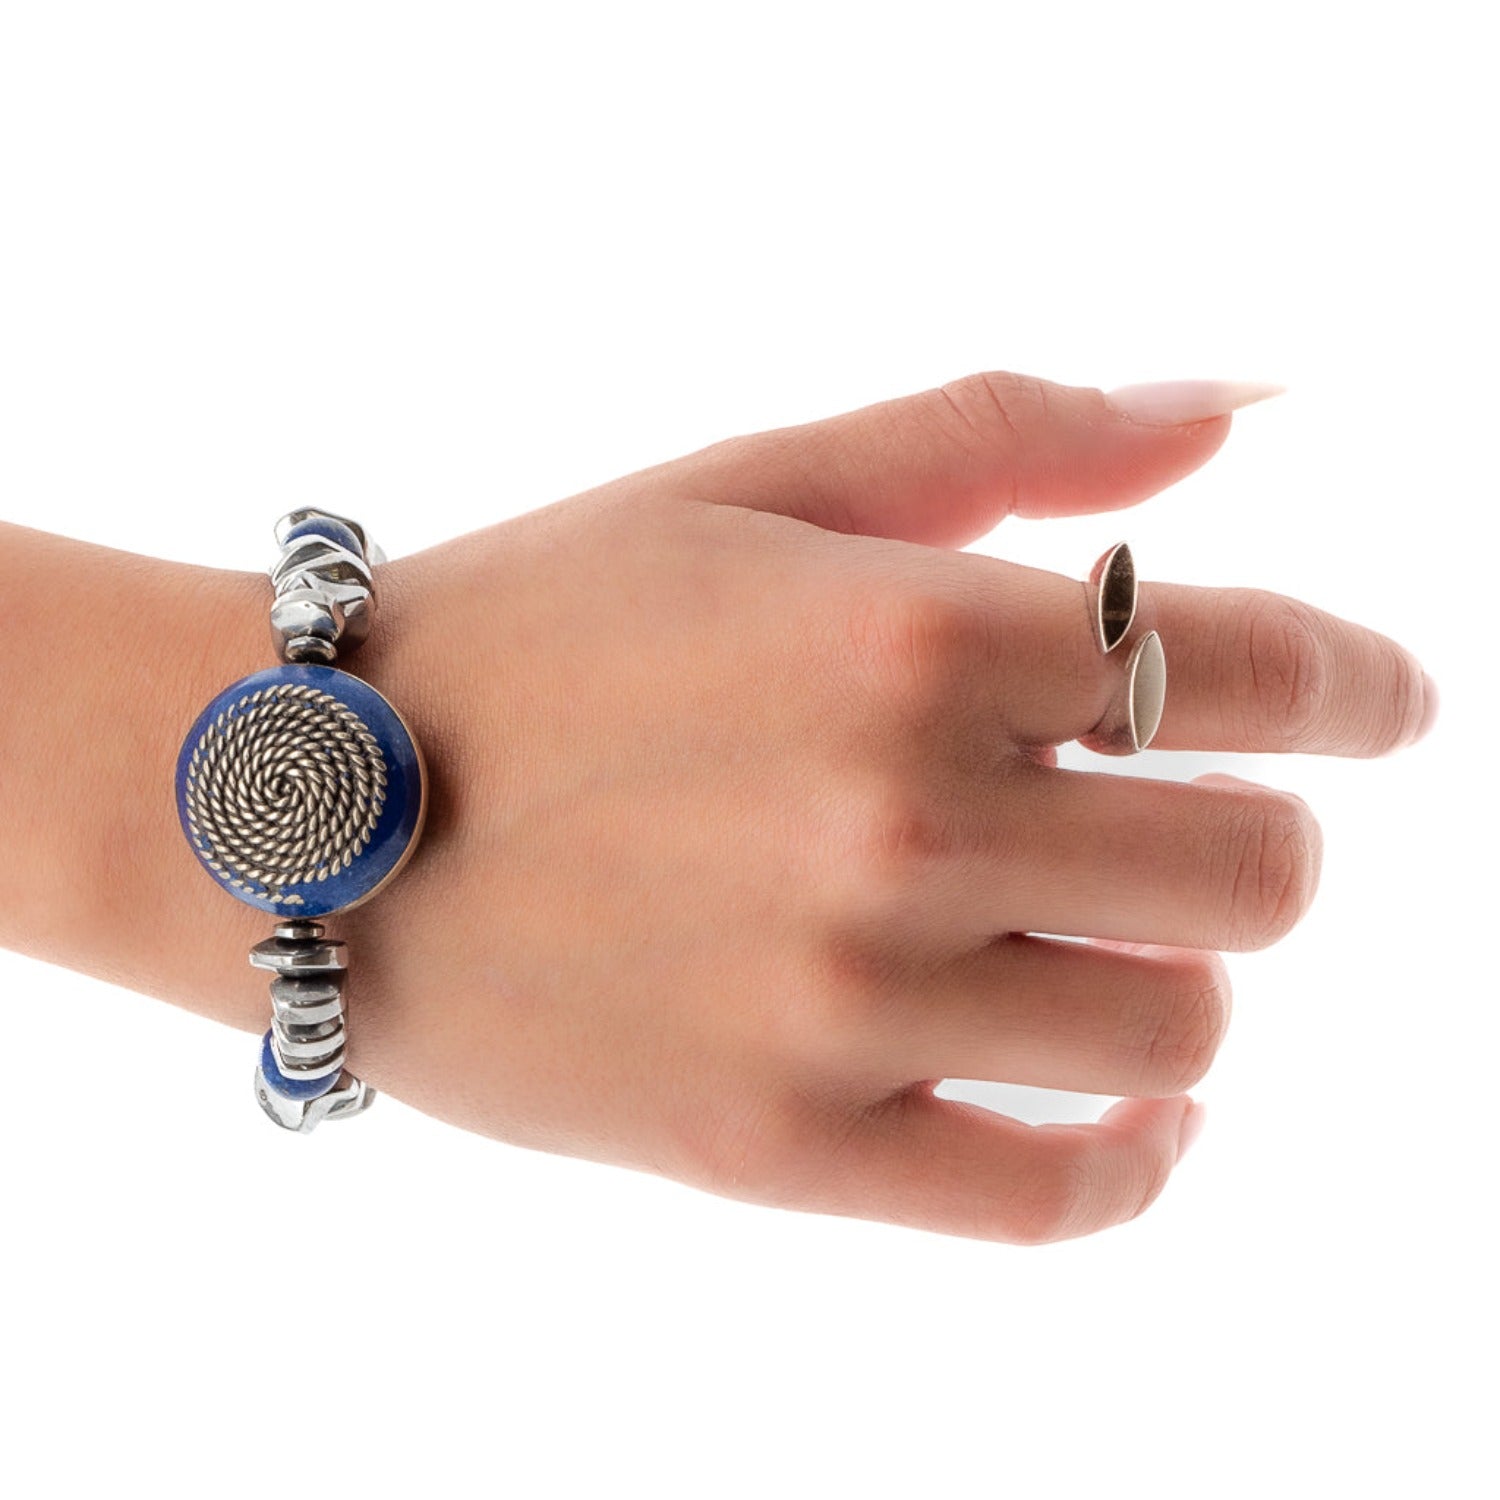 Experience the beauty of the Strong Women Bracelet as the model showcases its unique combination of silver hematite and lapis lazuli stone beads.